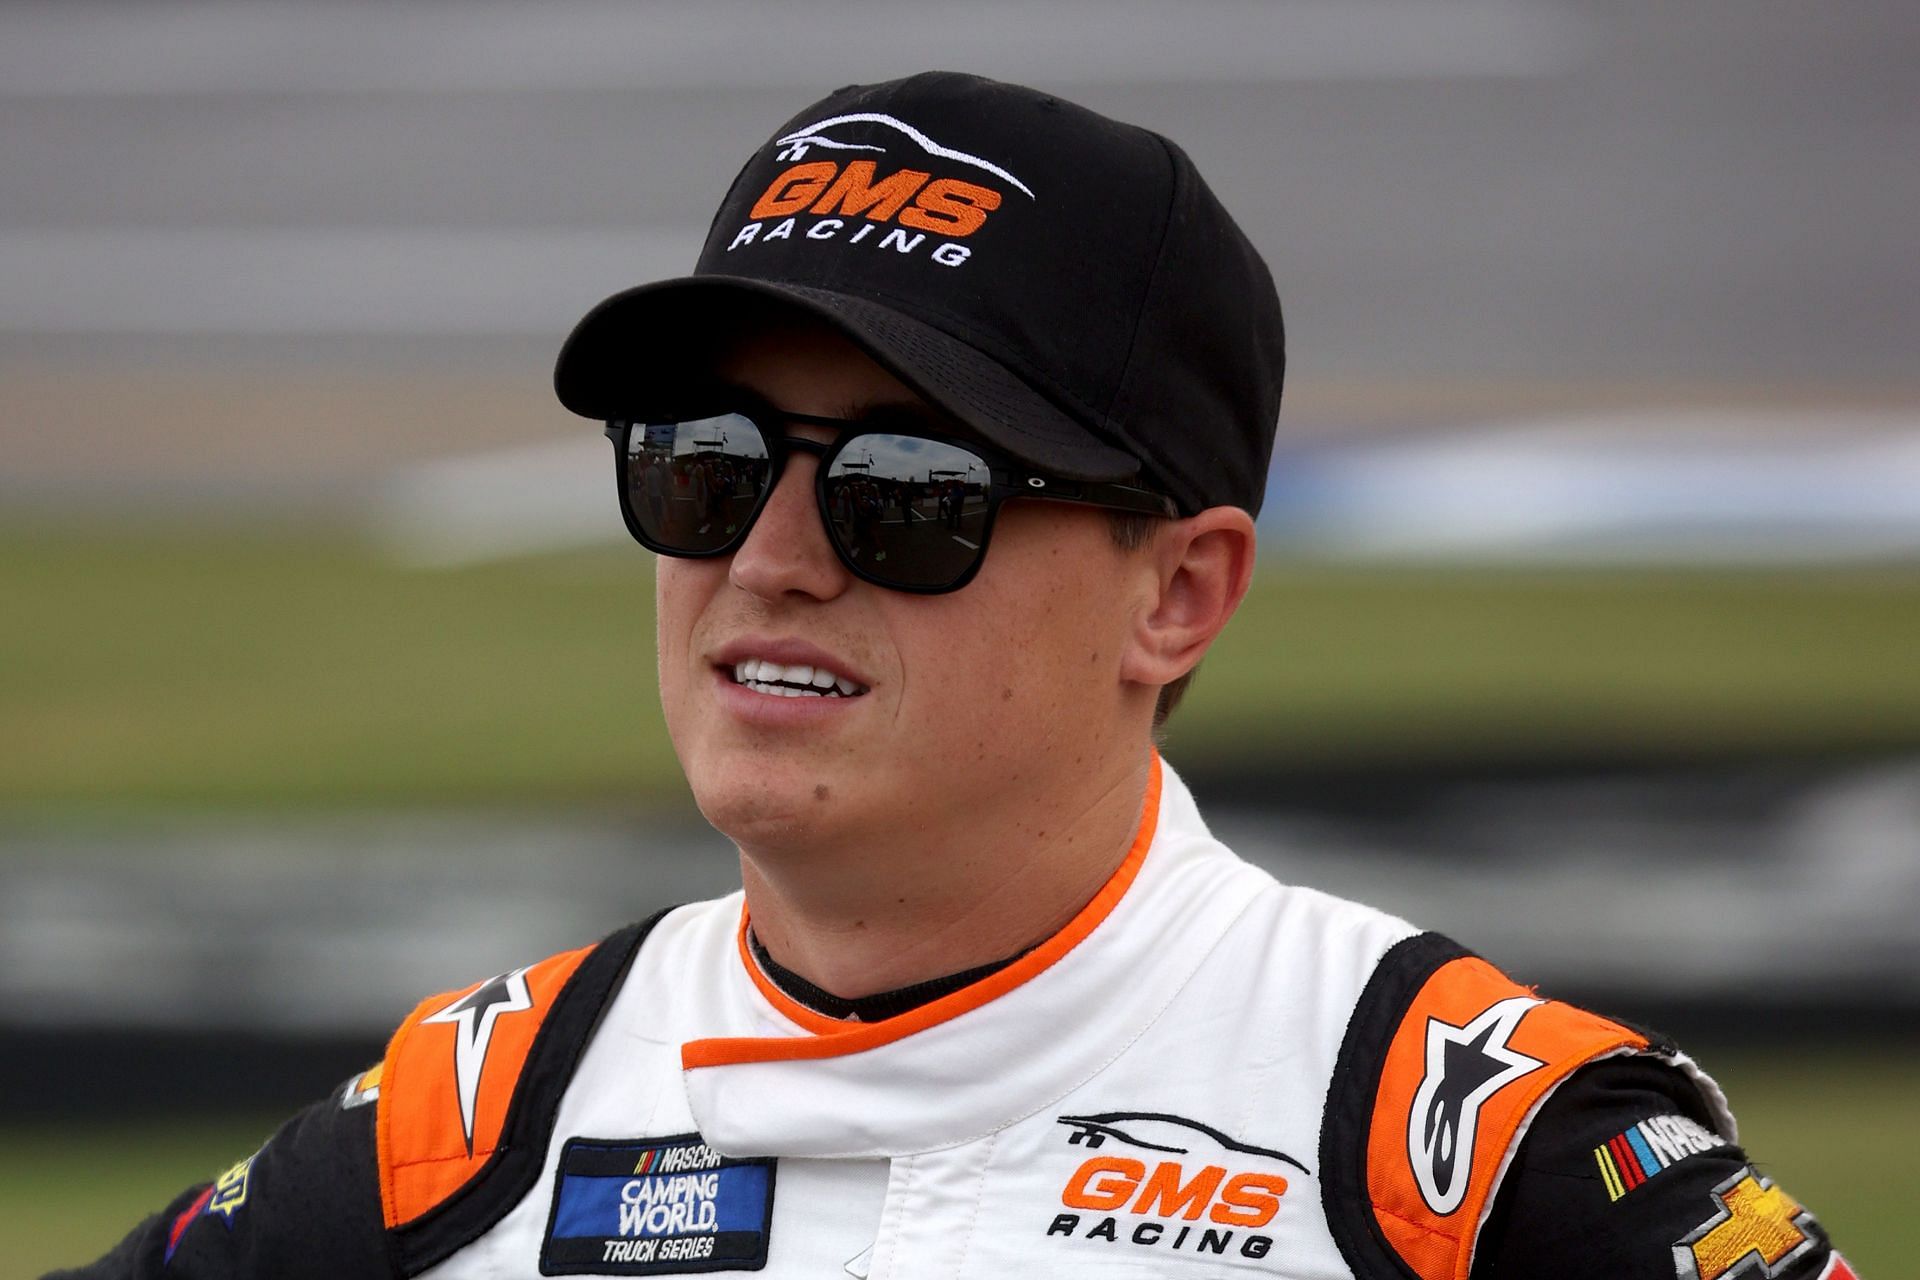 Zane Smith is without a contract for 2022, but that could change after his win at Martinsville Speedway gave him a shot at the Camping World Truck Series title next week in Phoenix. (Photo by Chris Graythen/Getty Images)